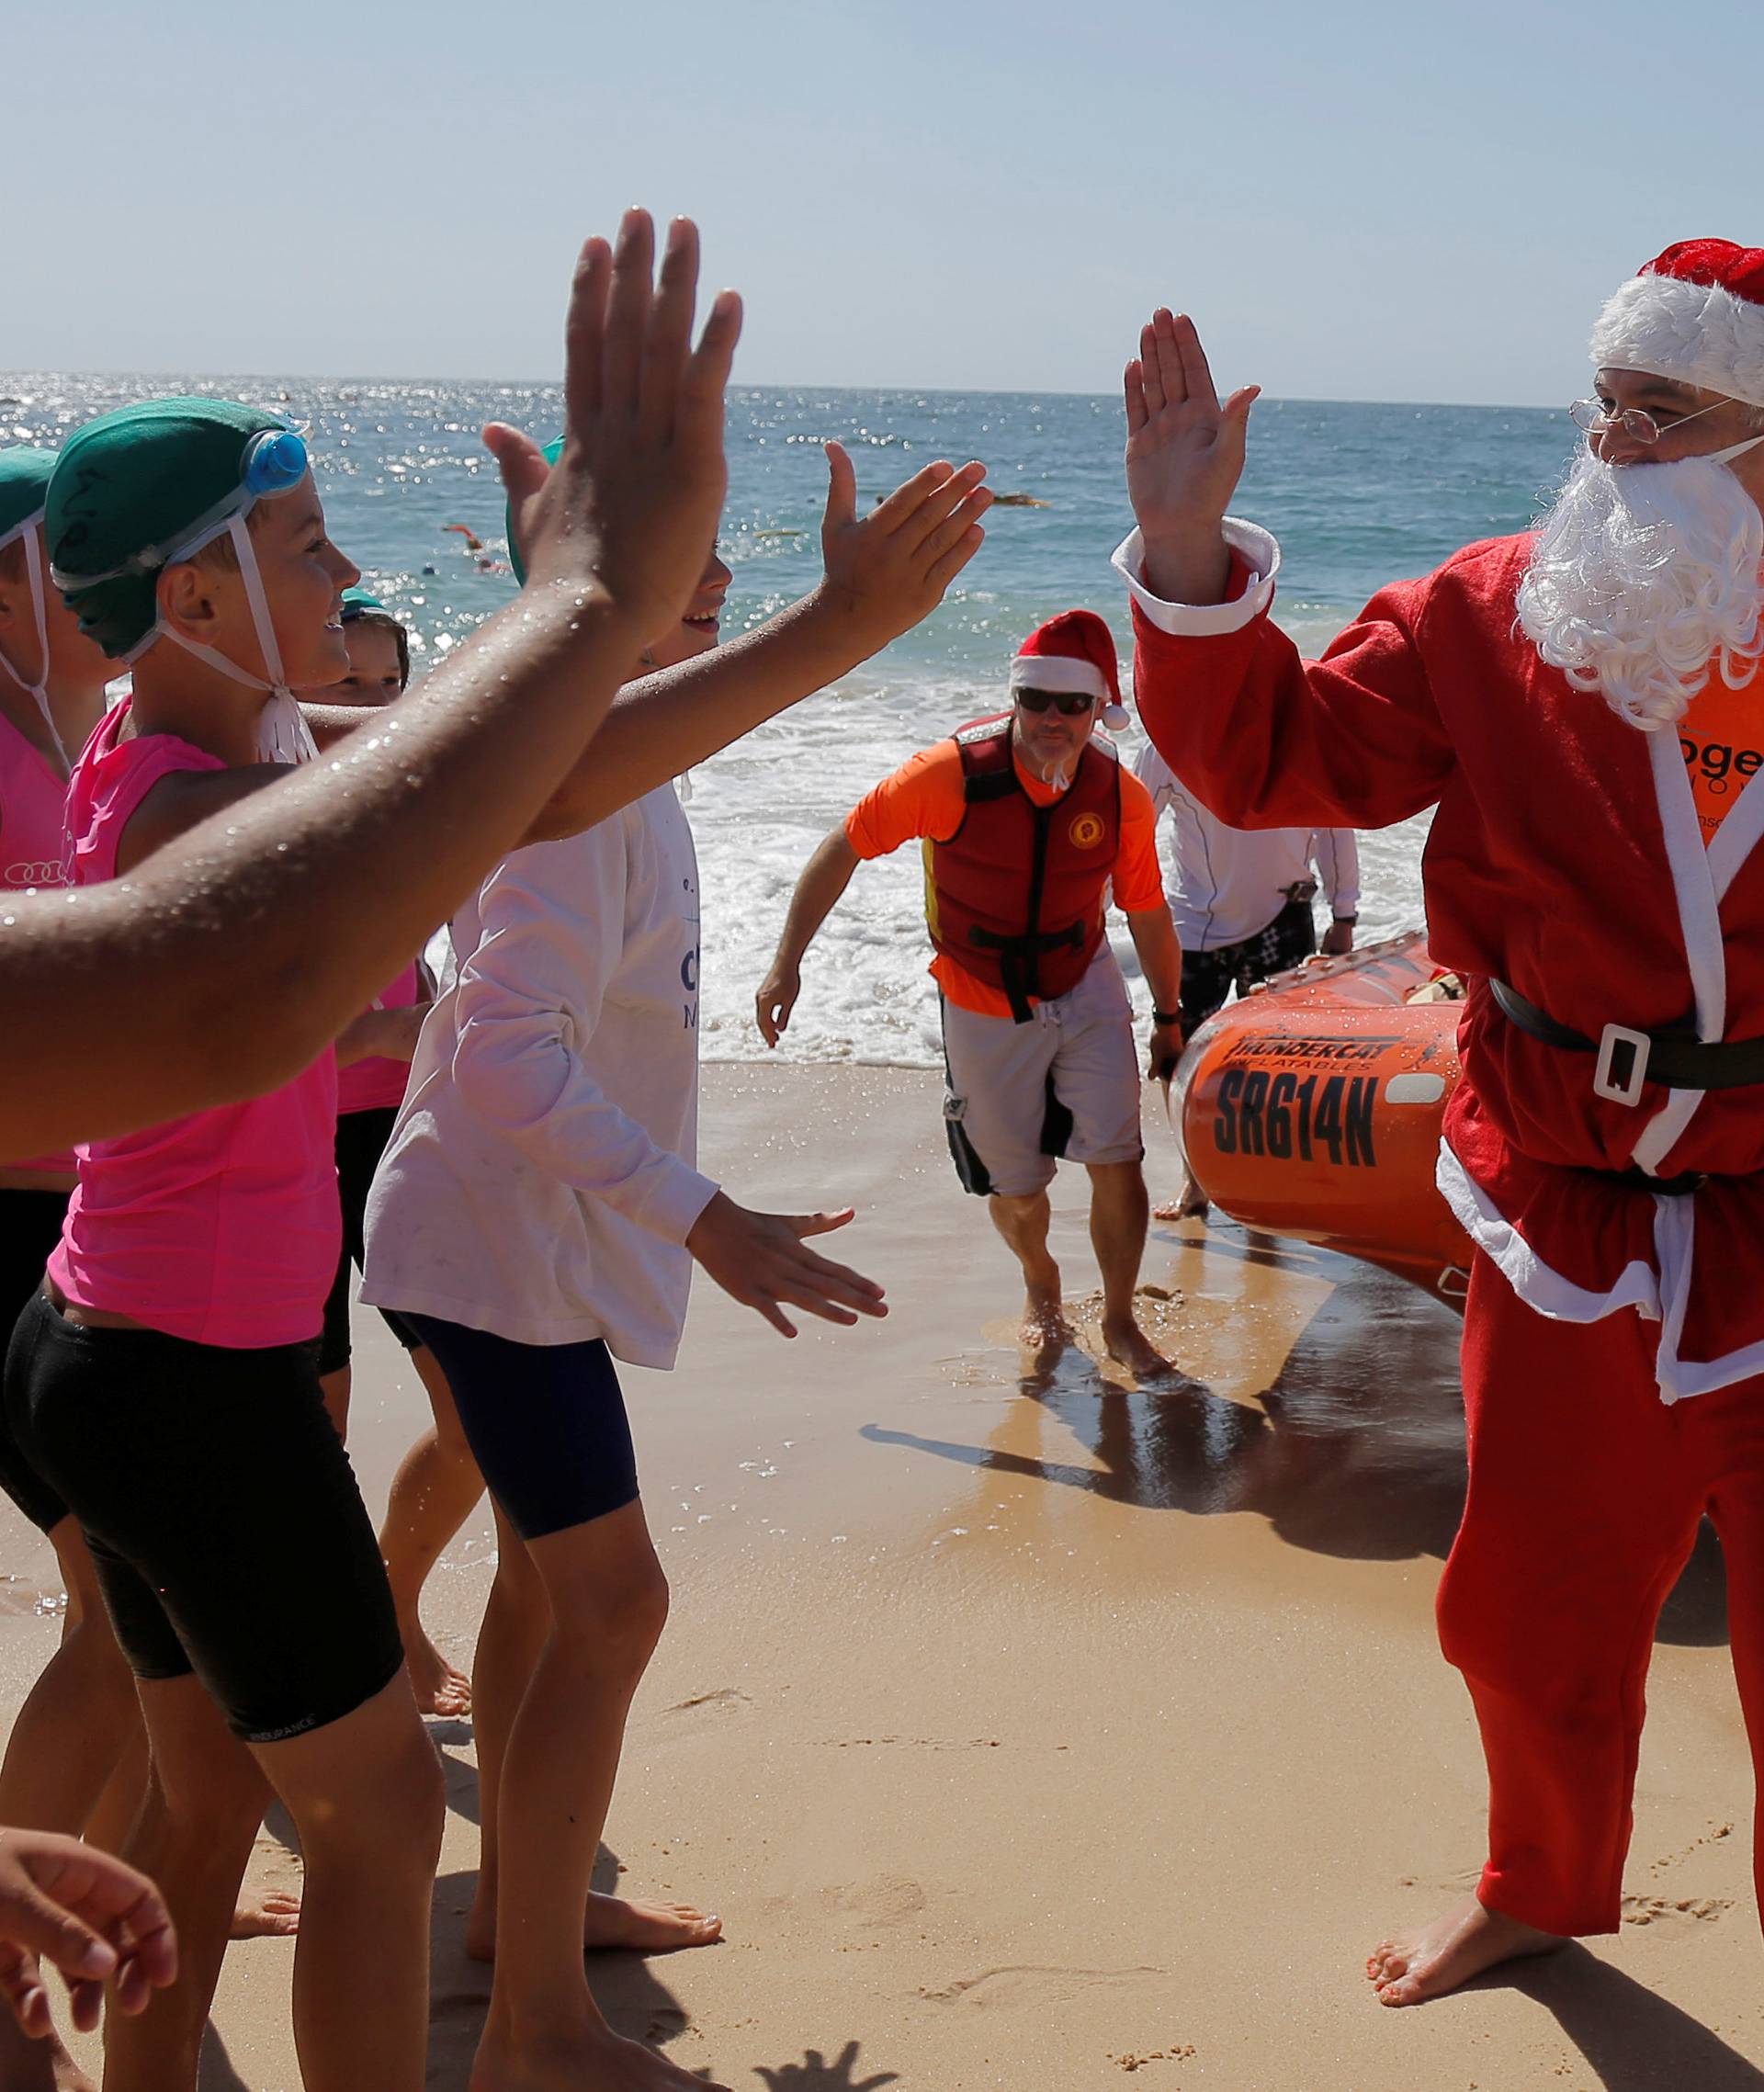 A surf life saver dressed as Santa Claus arrives to deliver gifts to children at Sydney's Coogee beach